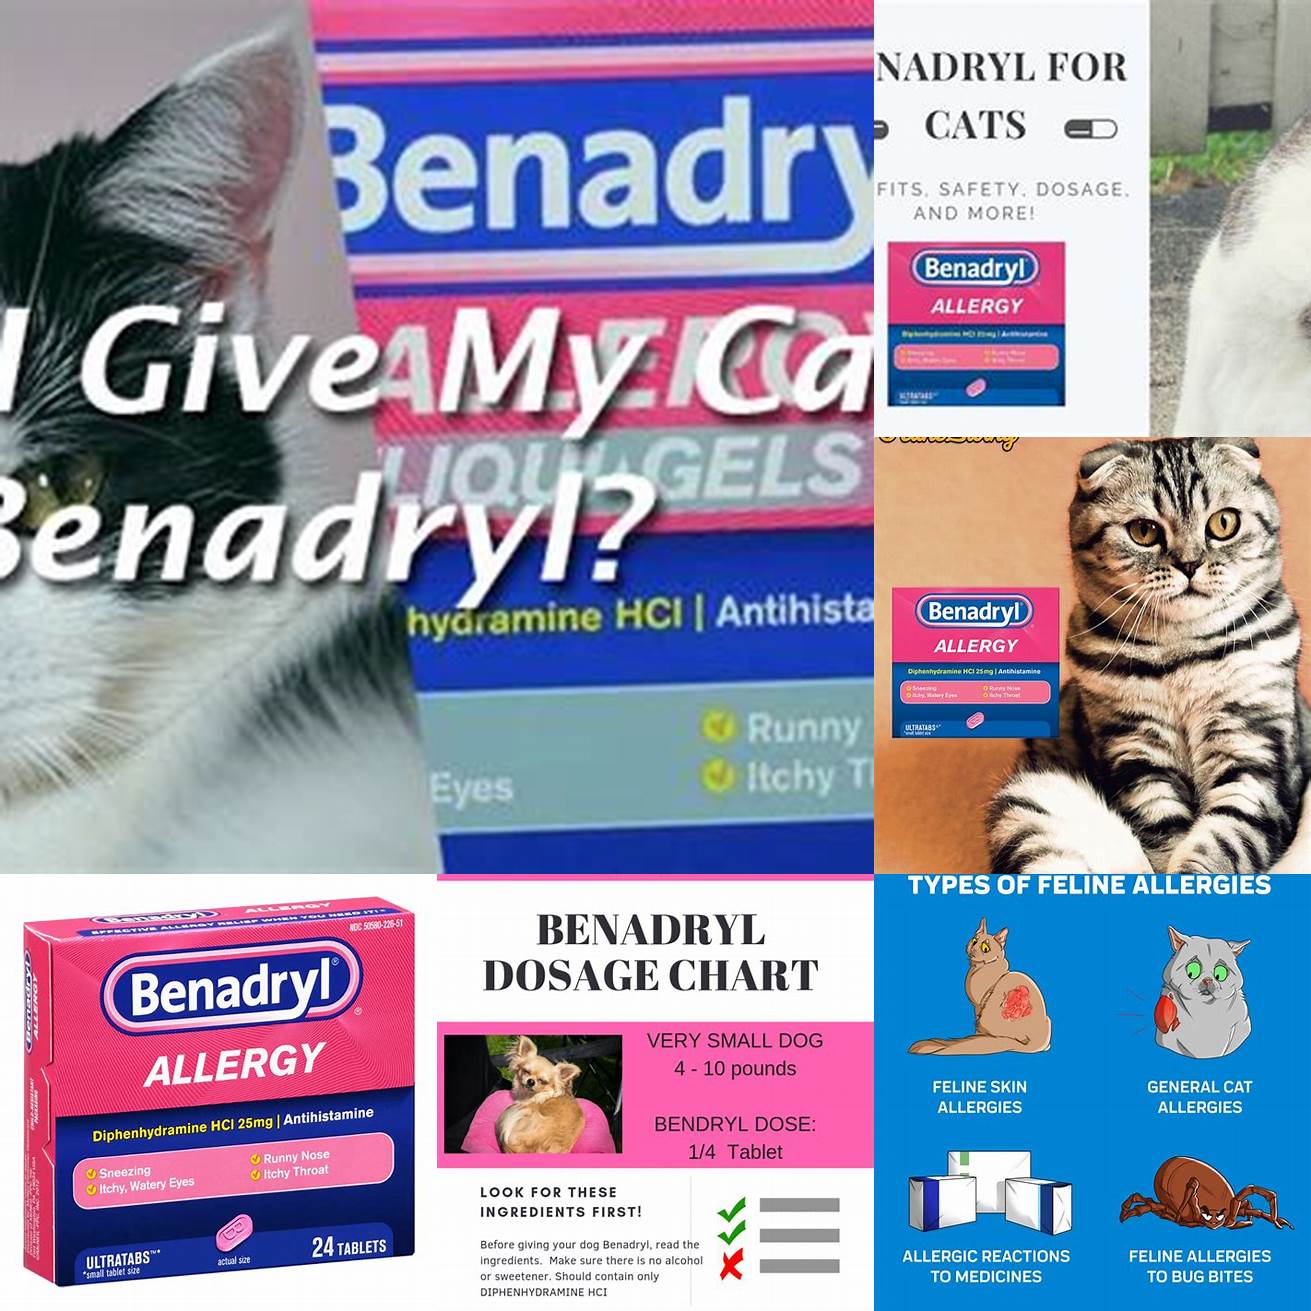 Q What should I do if my cat has an adverse reaction to Benadryl